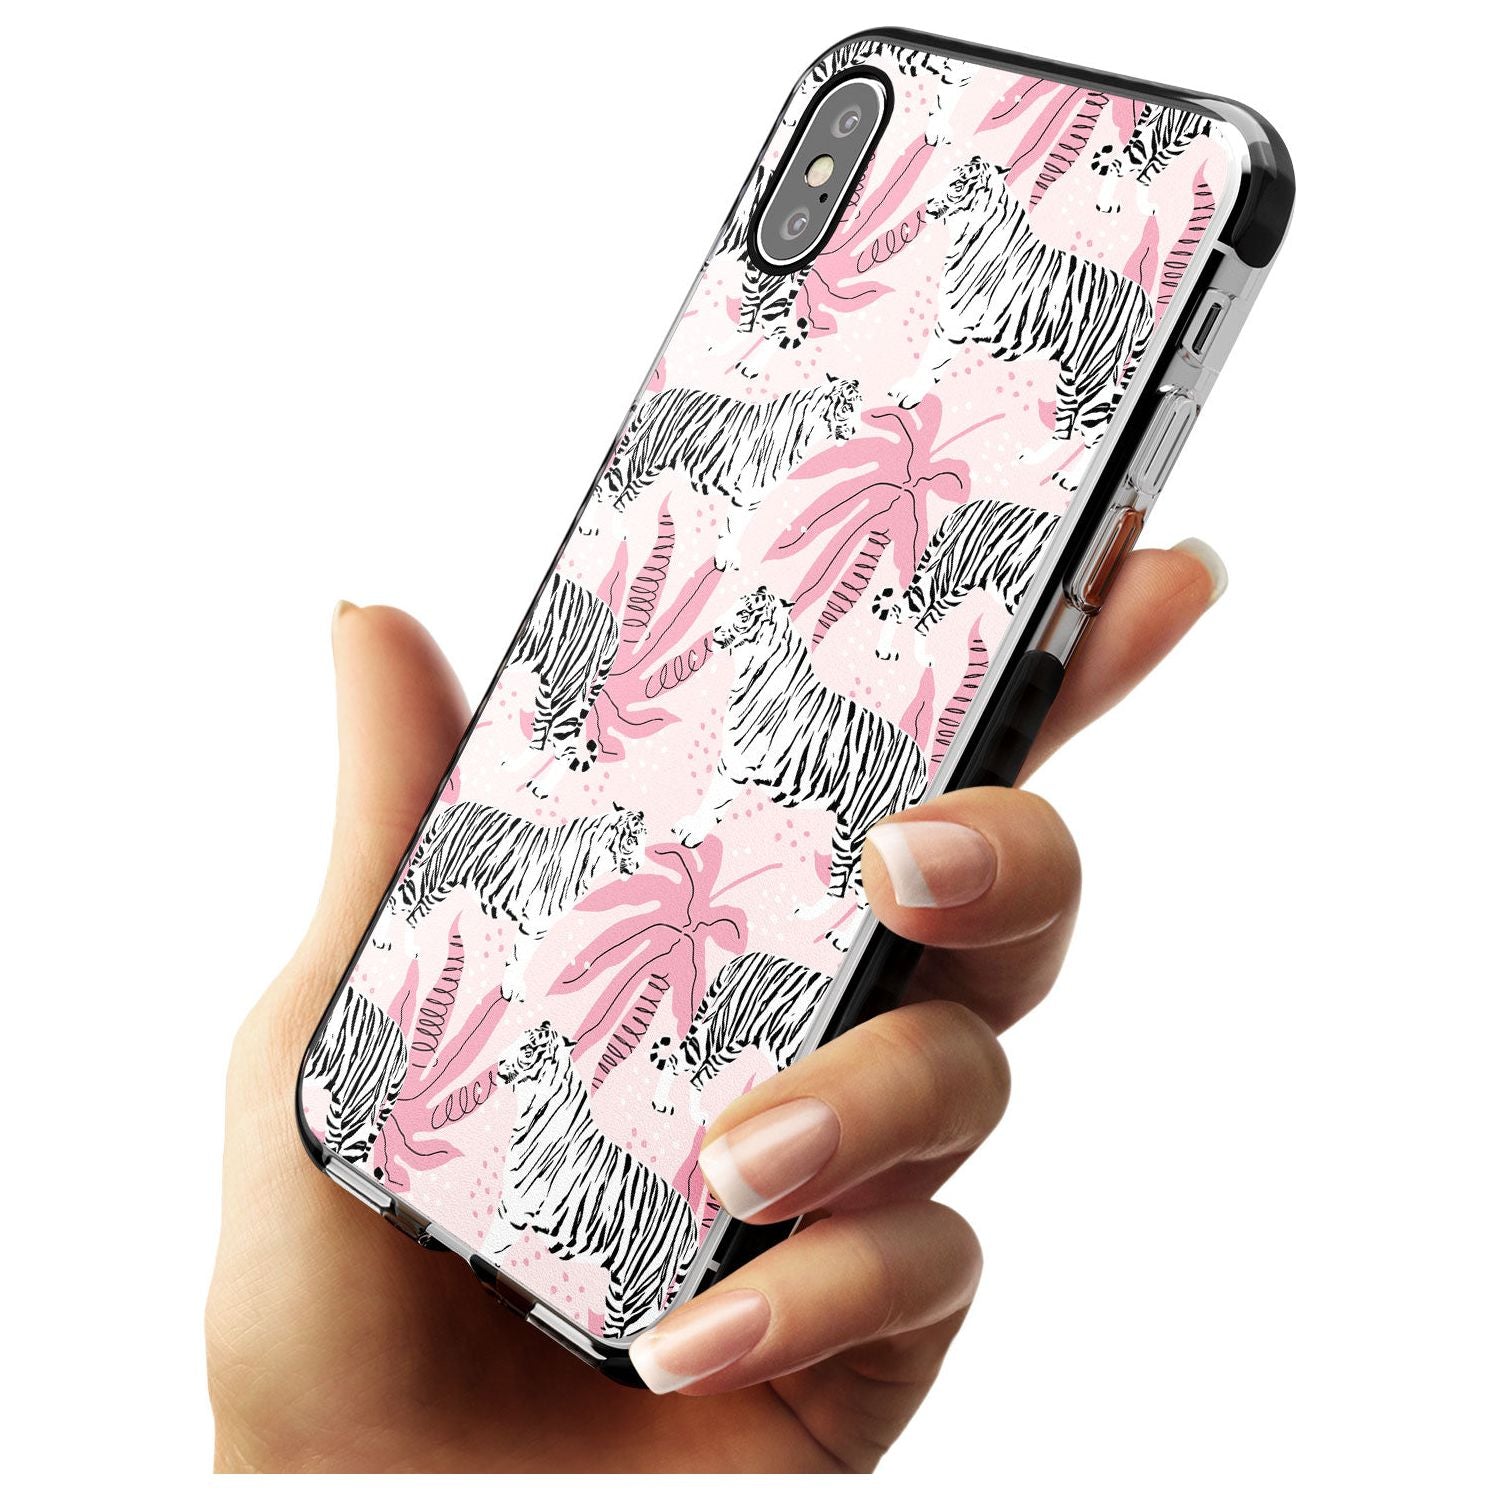 White Tigers on Pink Pattern Black Impact Phone Case for iPhone X XS Max XR